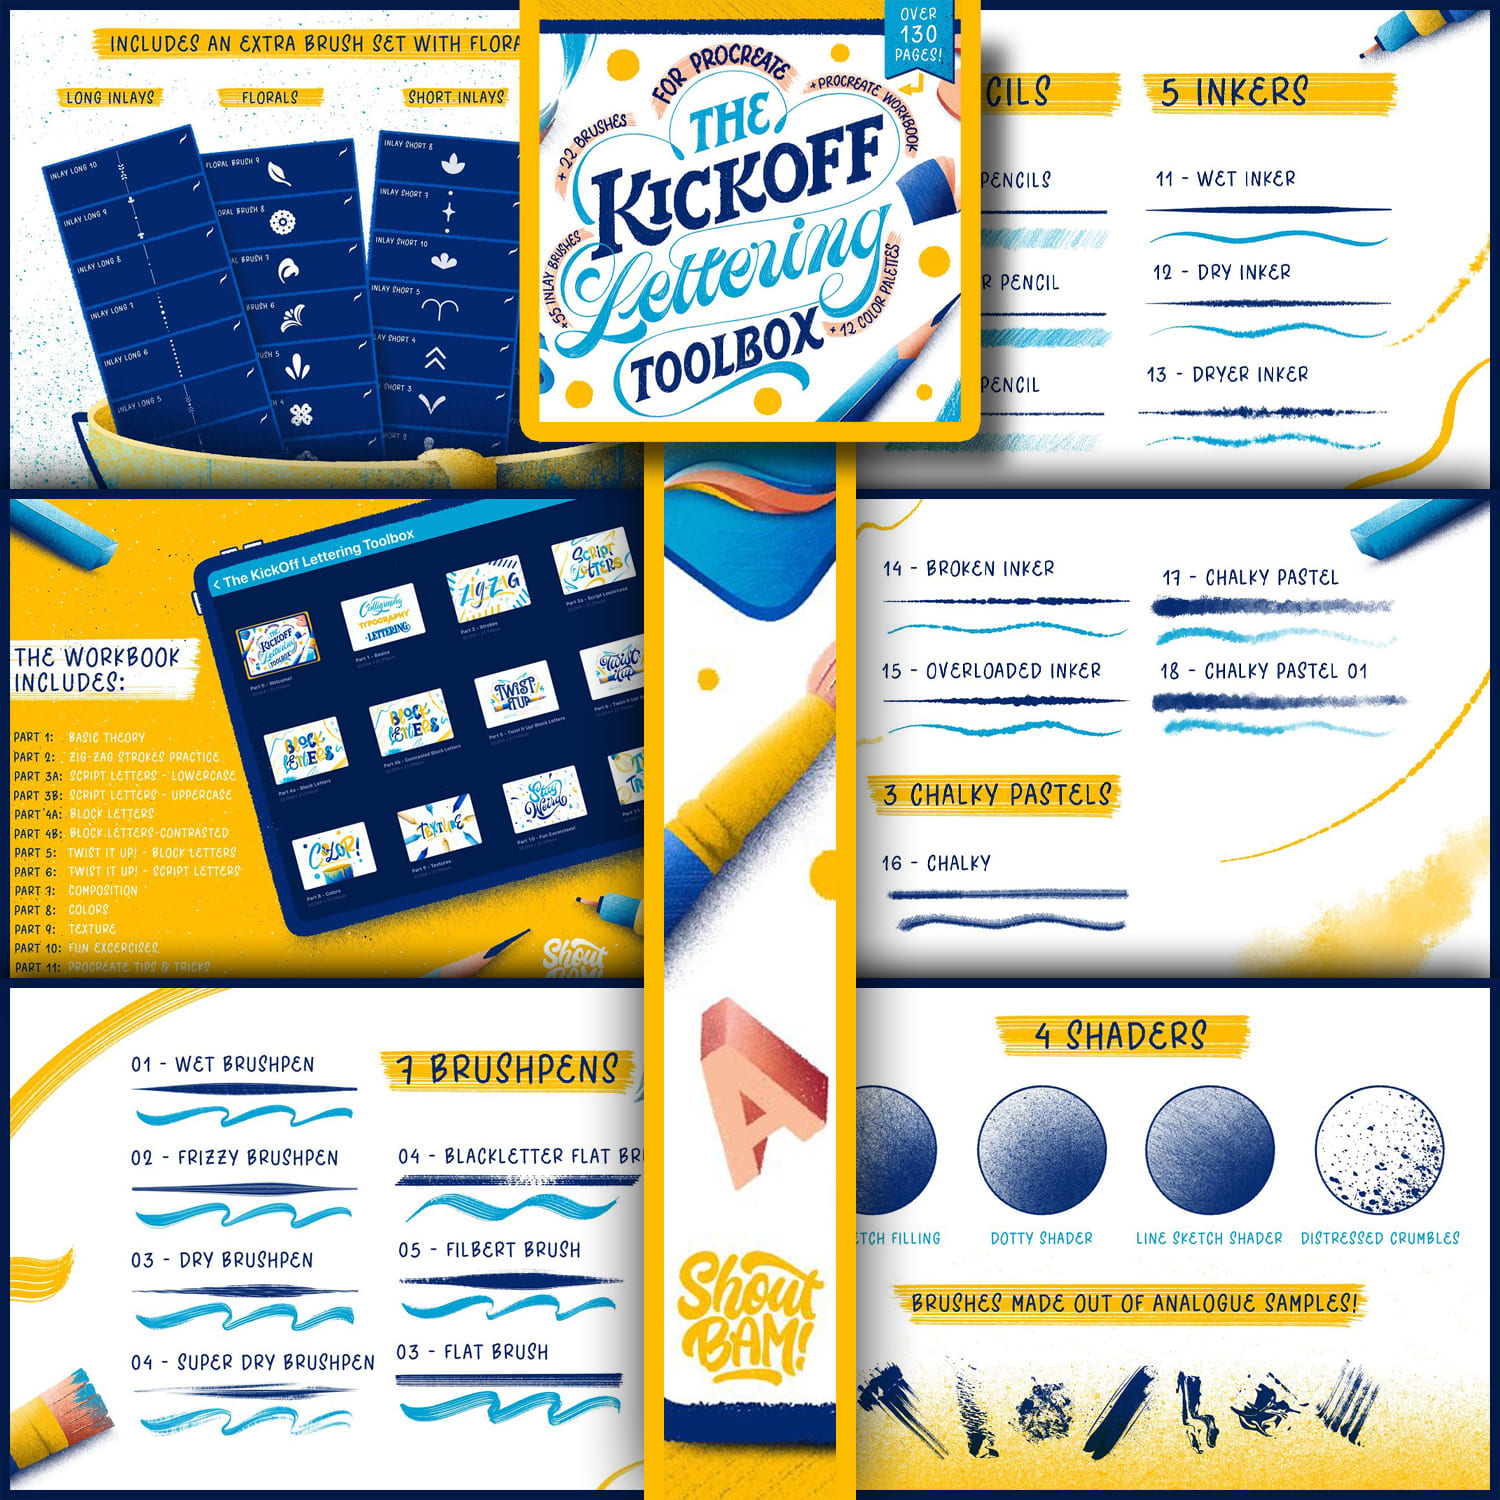 The KickOff Lettering Toolbox created by Shoutbam.